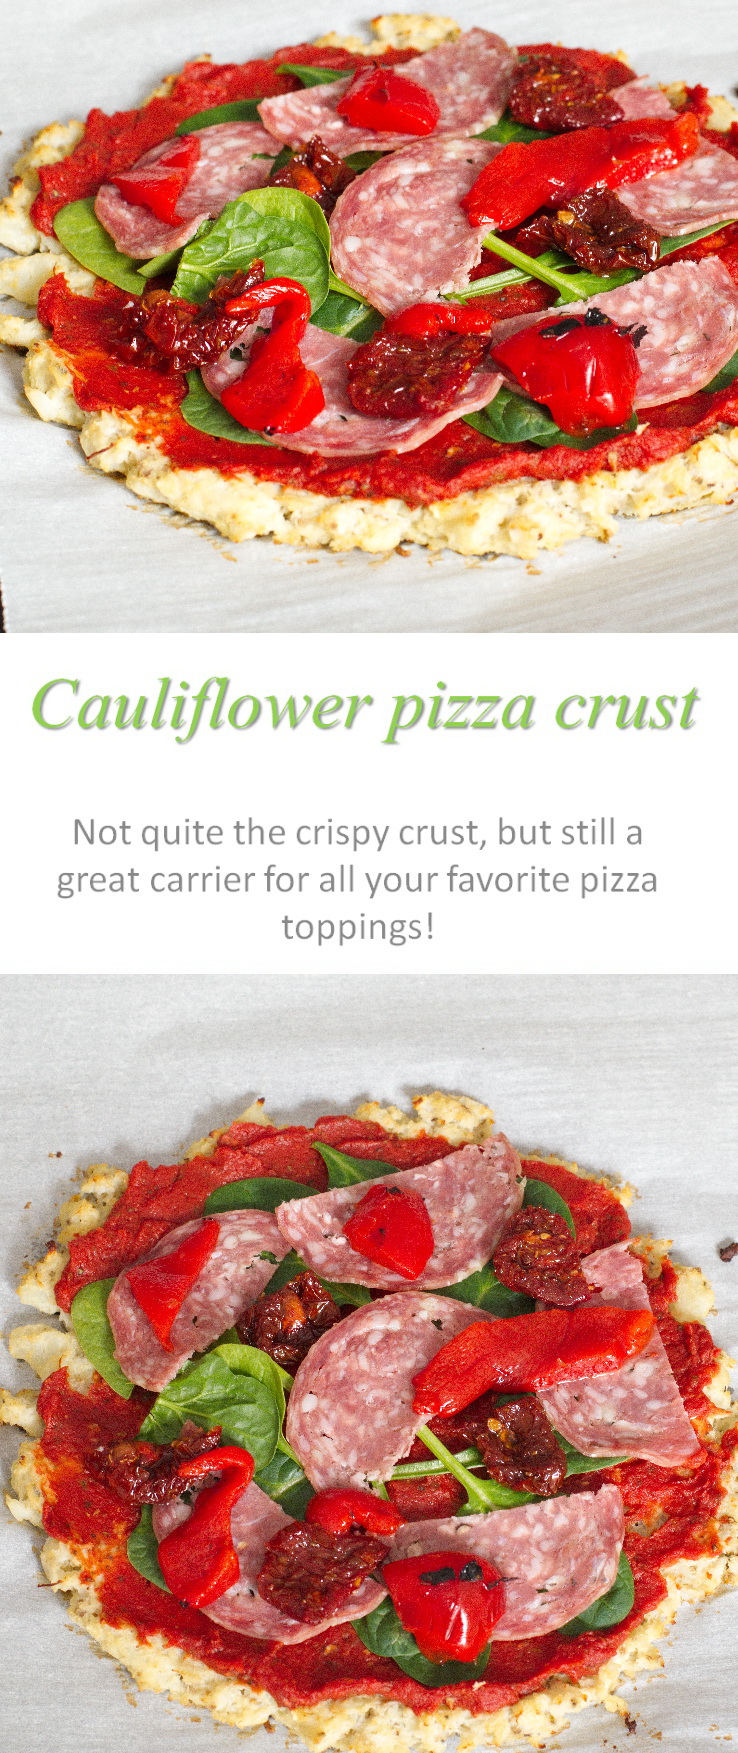 This cauliflower pizza crust is a gluten-free carrier for pizza toppings, but a crispy pizza crust it isn't! #pizza